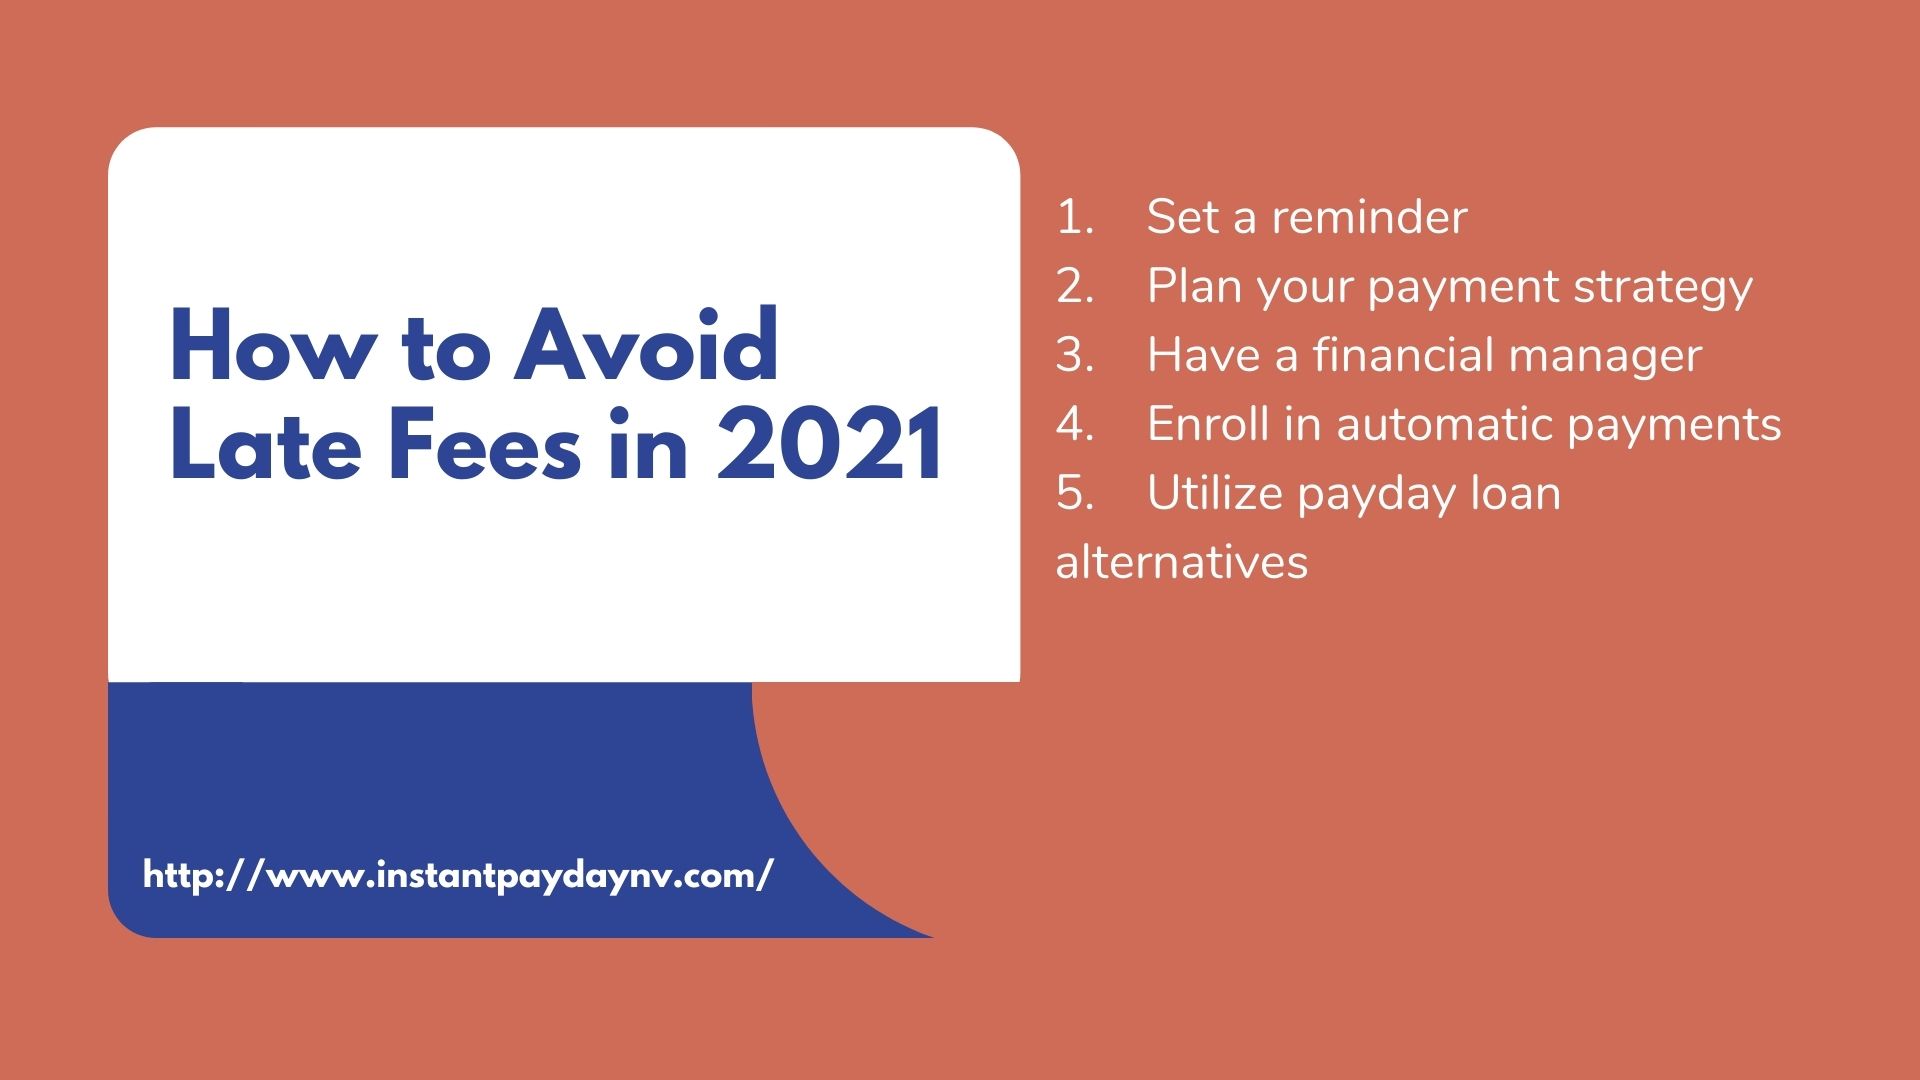 How to Avoid Late Fees in 2021